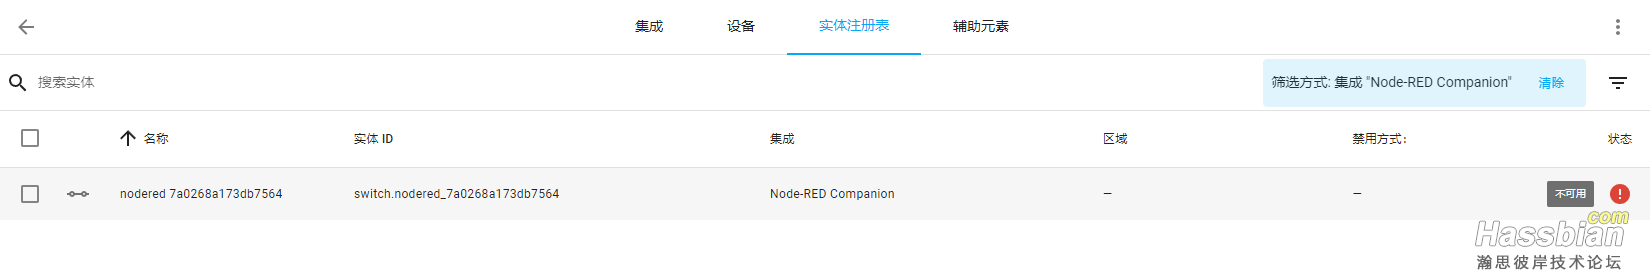 Node-RED Companion不可用.png